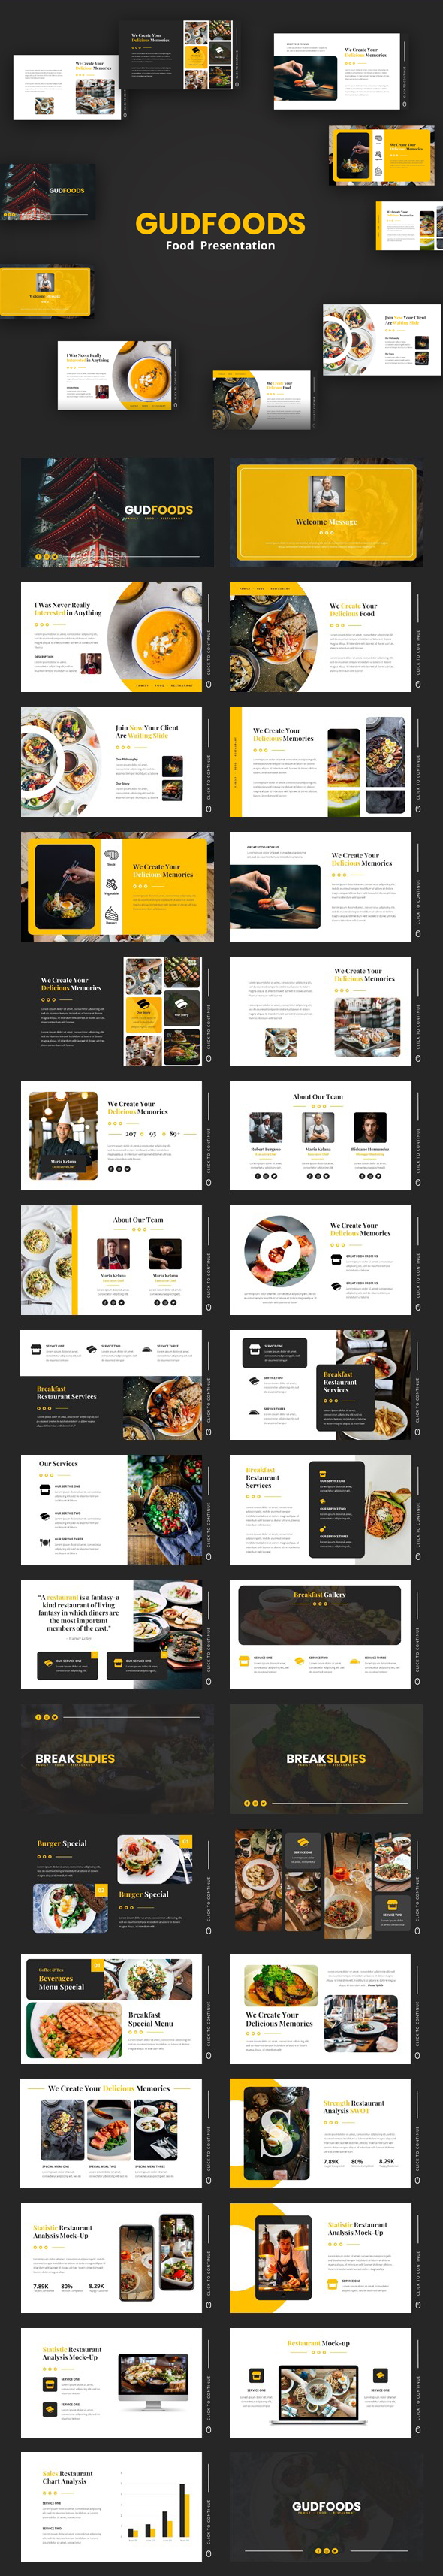 GudFoods - Food PowerPoint Template